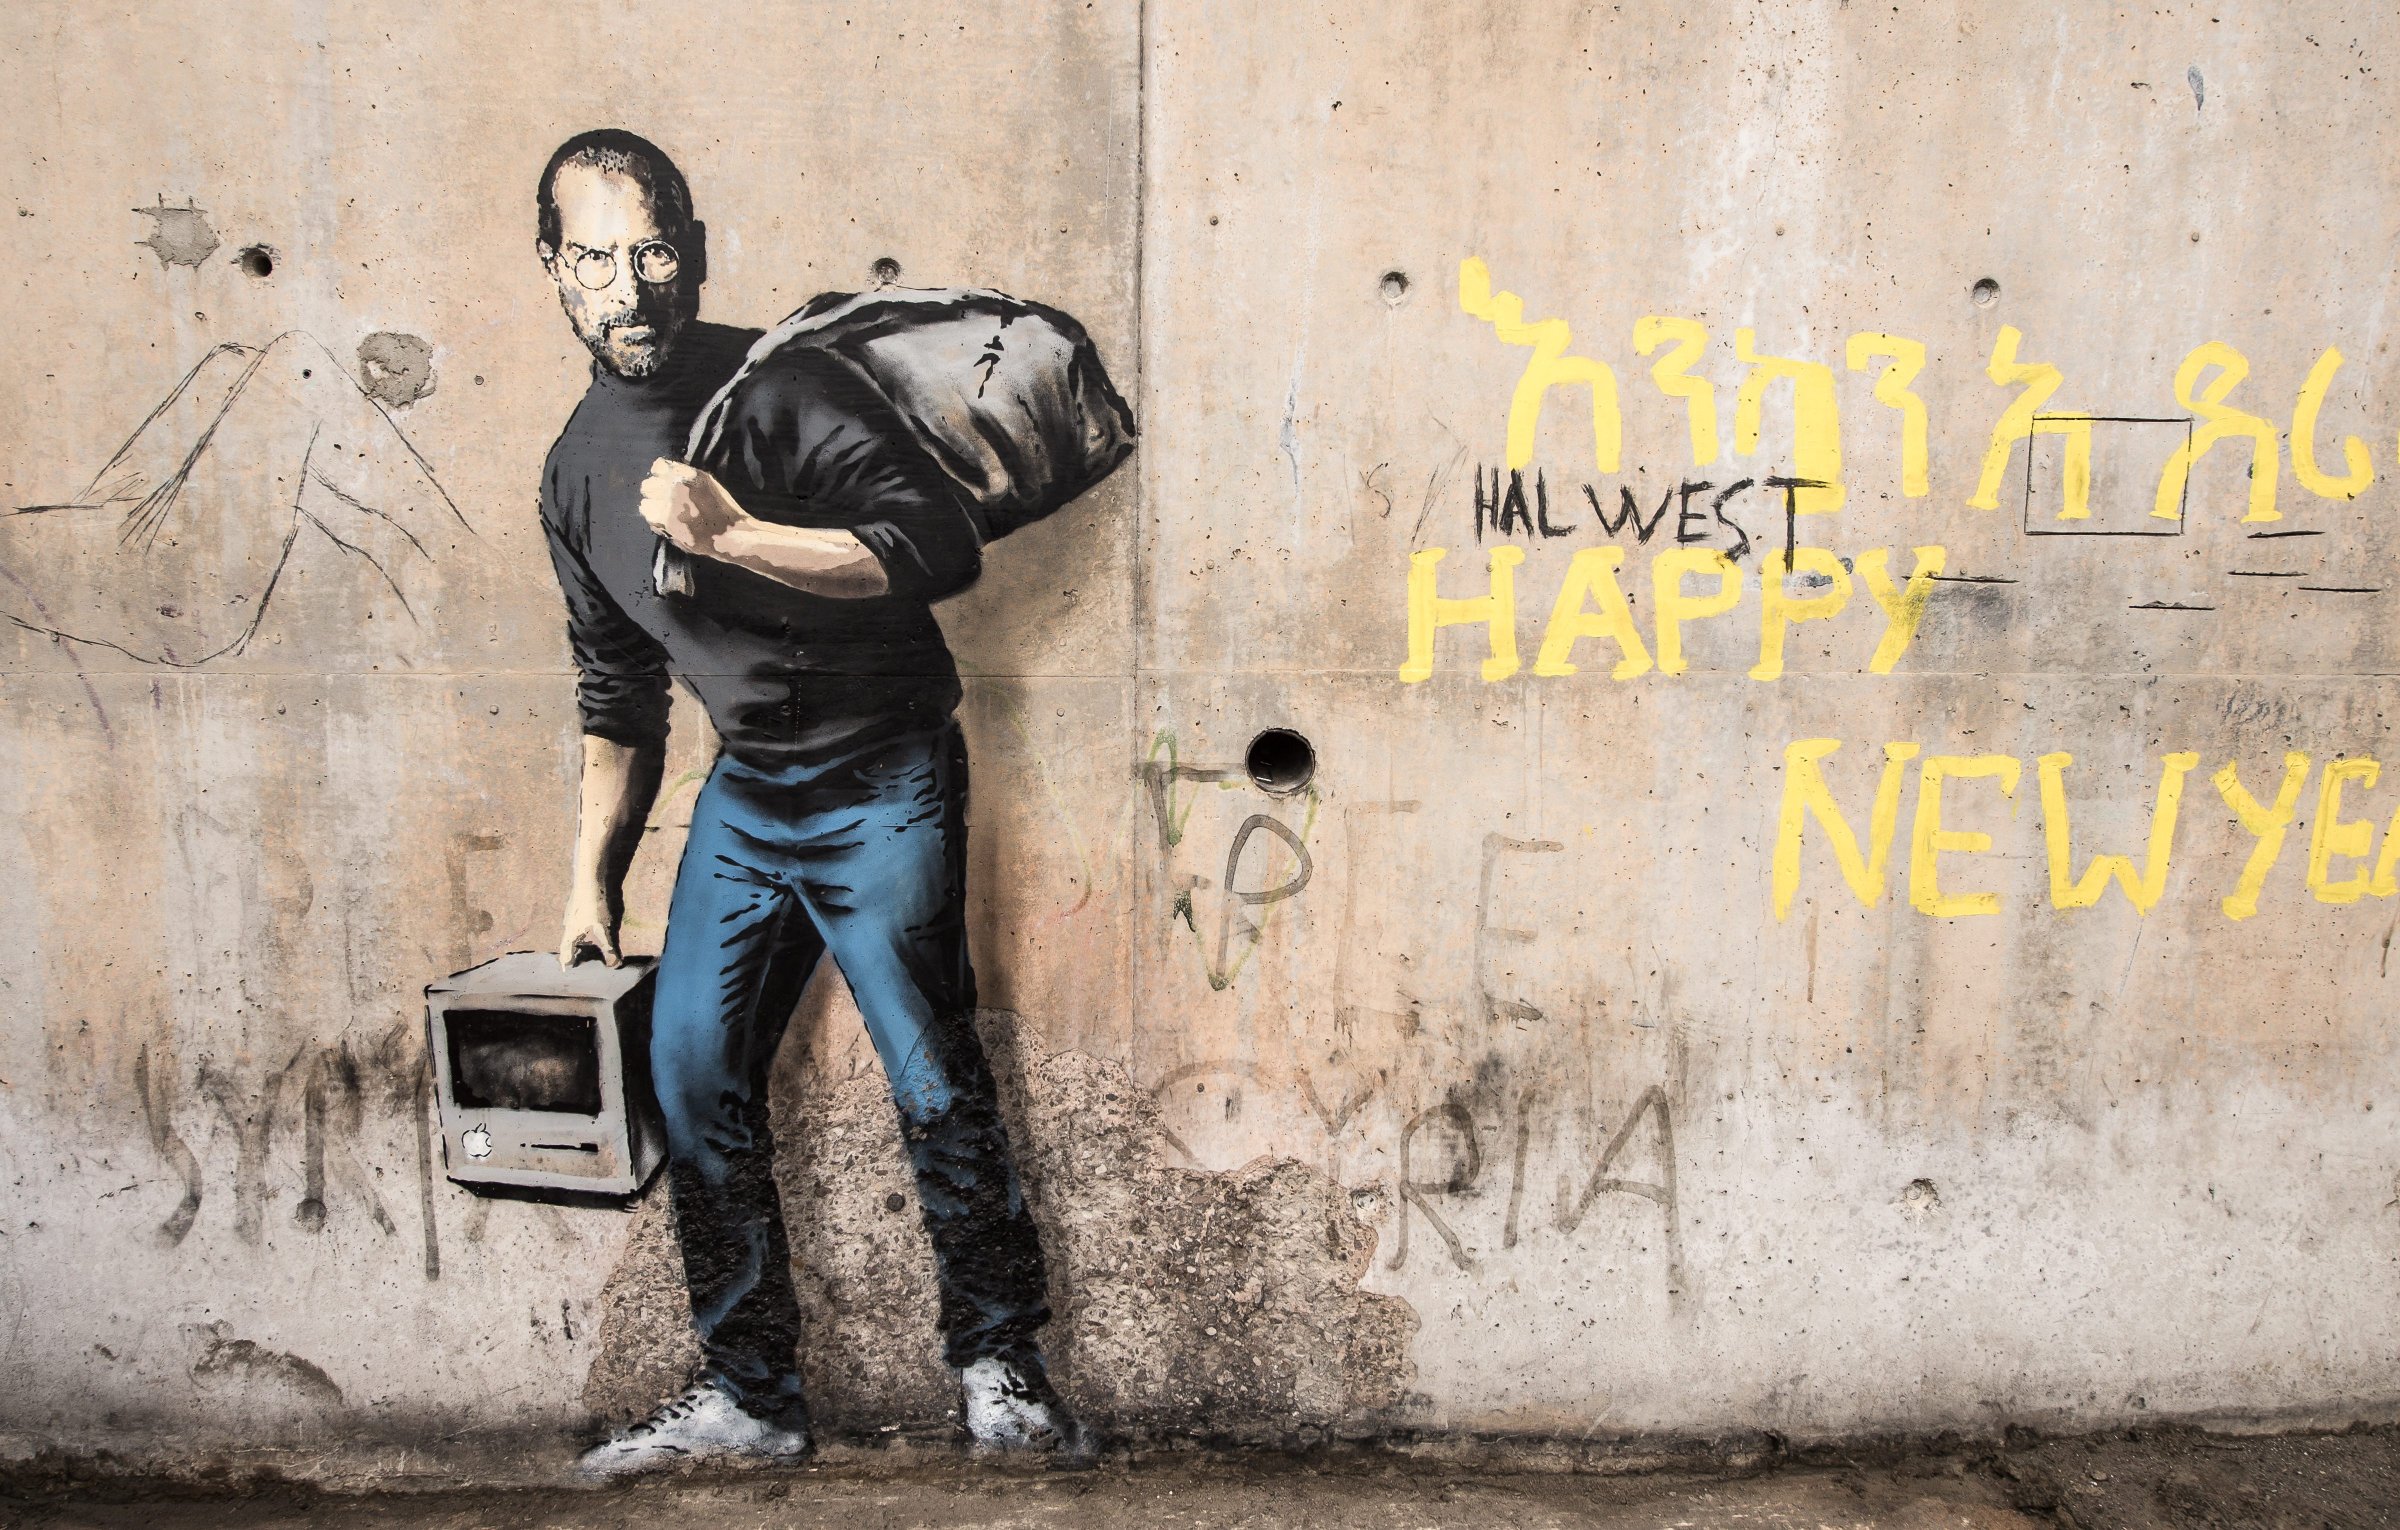 This picture taken on December 12, 2015 shows a street art graffiti representing Steve Jobs, founder and late CEO of Apple, by elusive British artist Banksy at the migrant camp known as the "Jungle" in Calais, northern France.